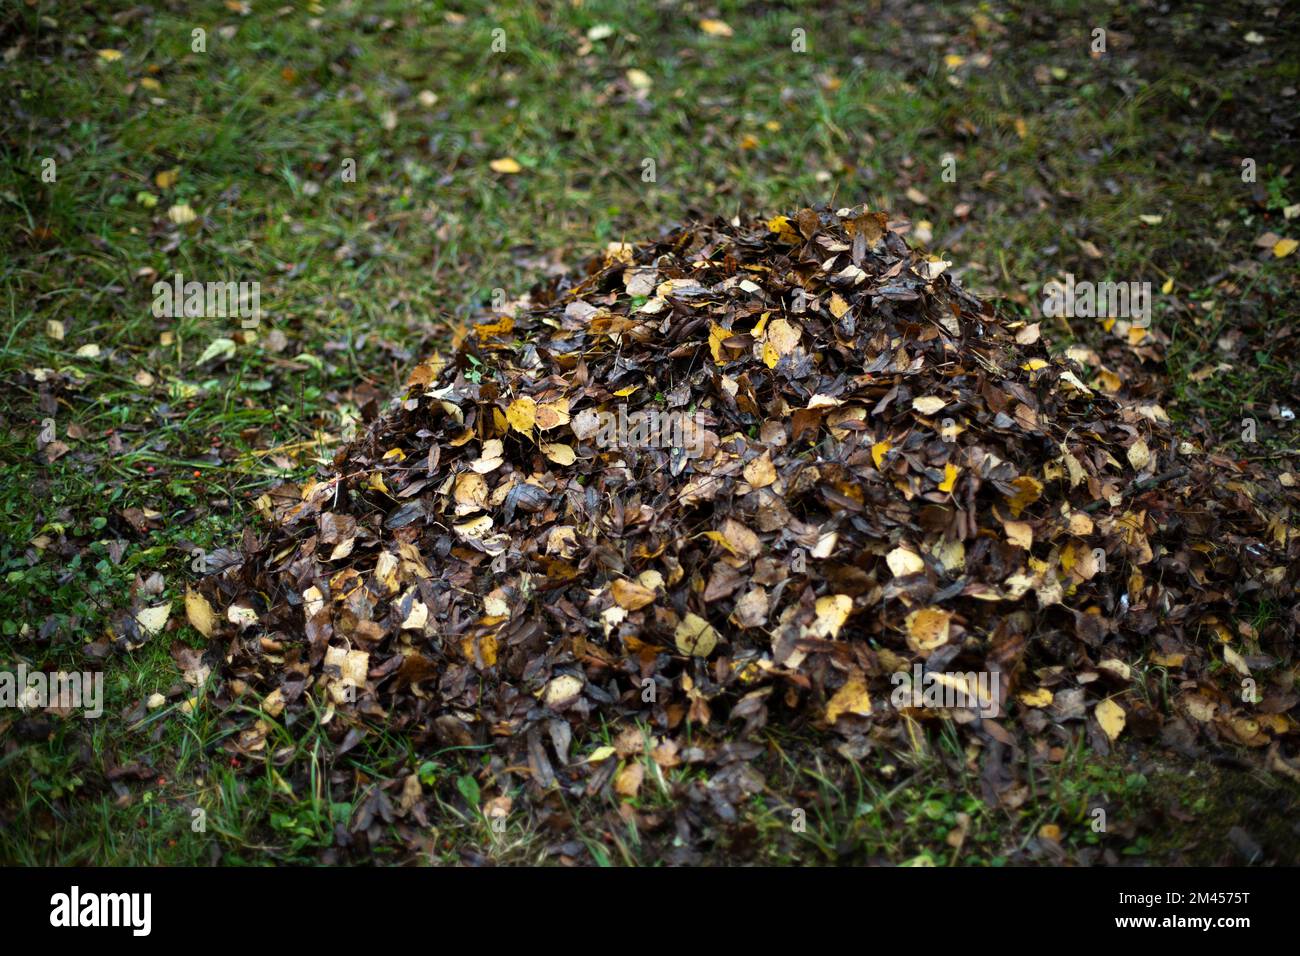 Leaves on grass. Cleaning leaves. Pile lies on lawn. After cleaning. Stock Photo